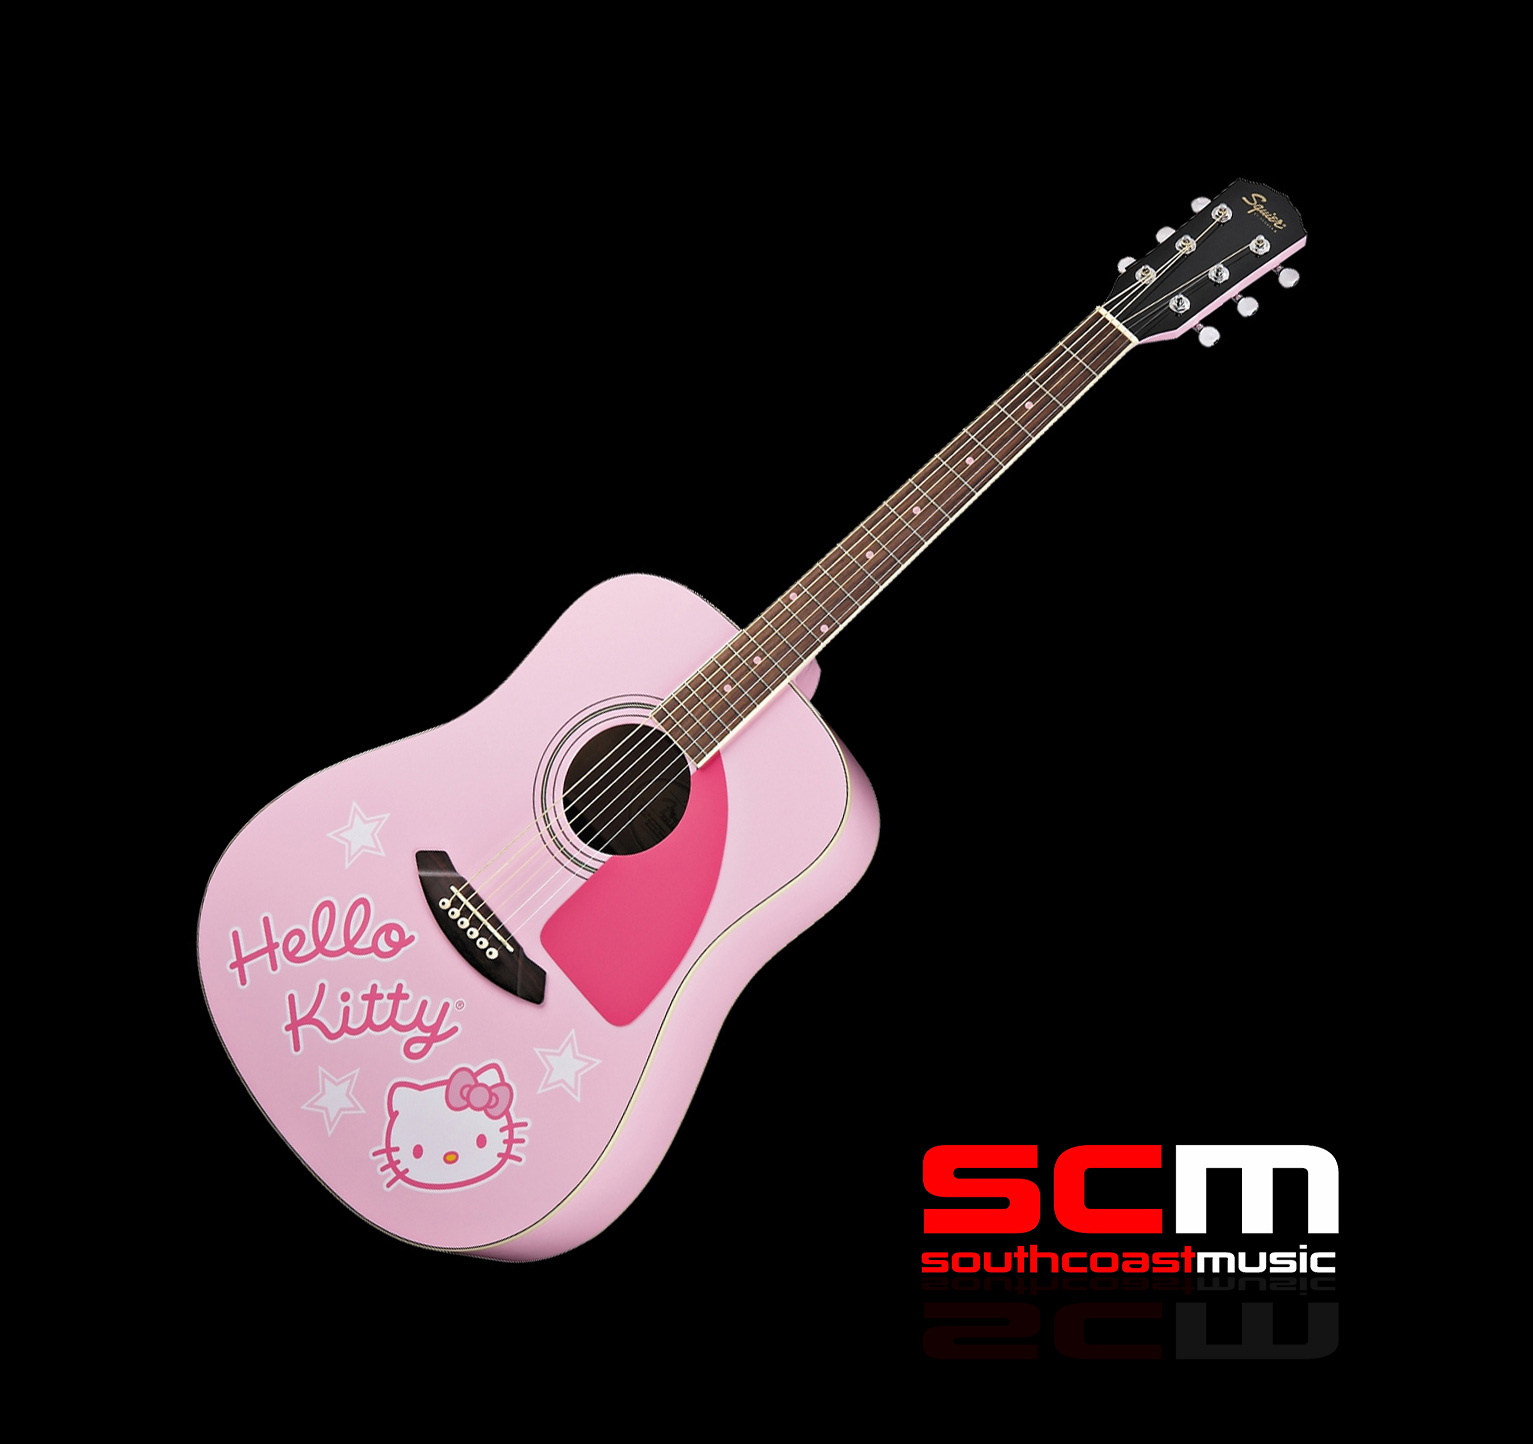 Fender Squier Hello Kitty Dreadnought Acoustic Guitar Pink ...